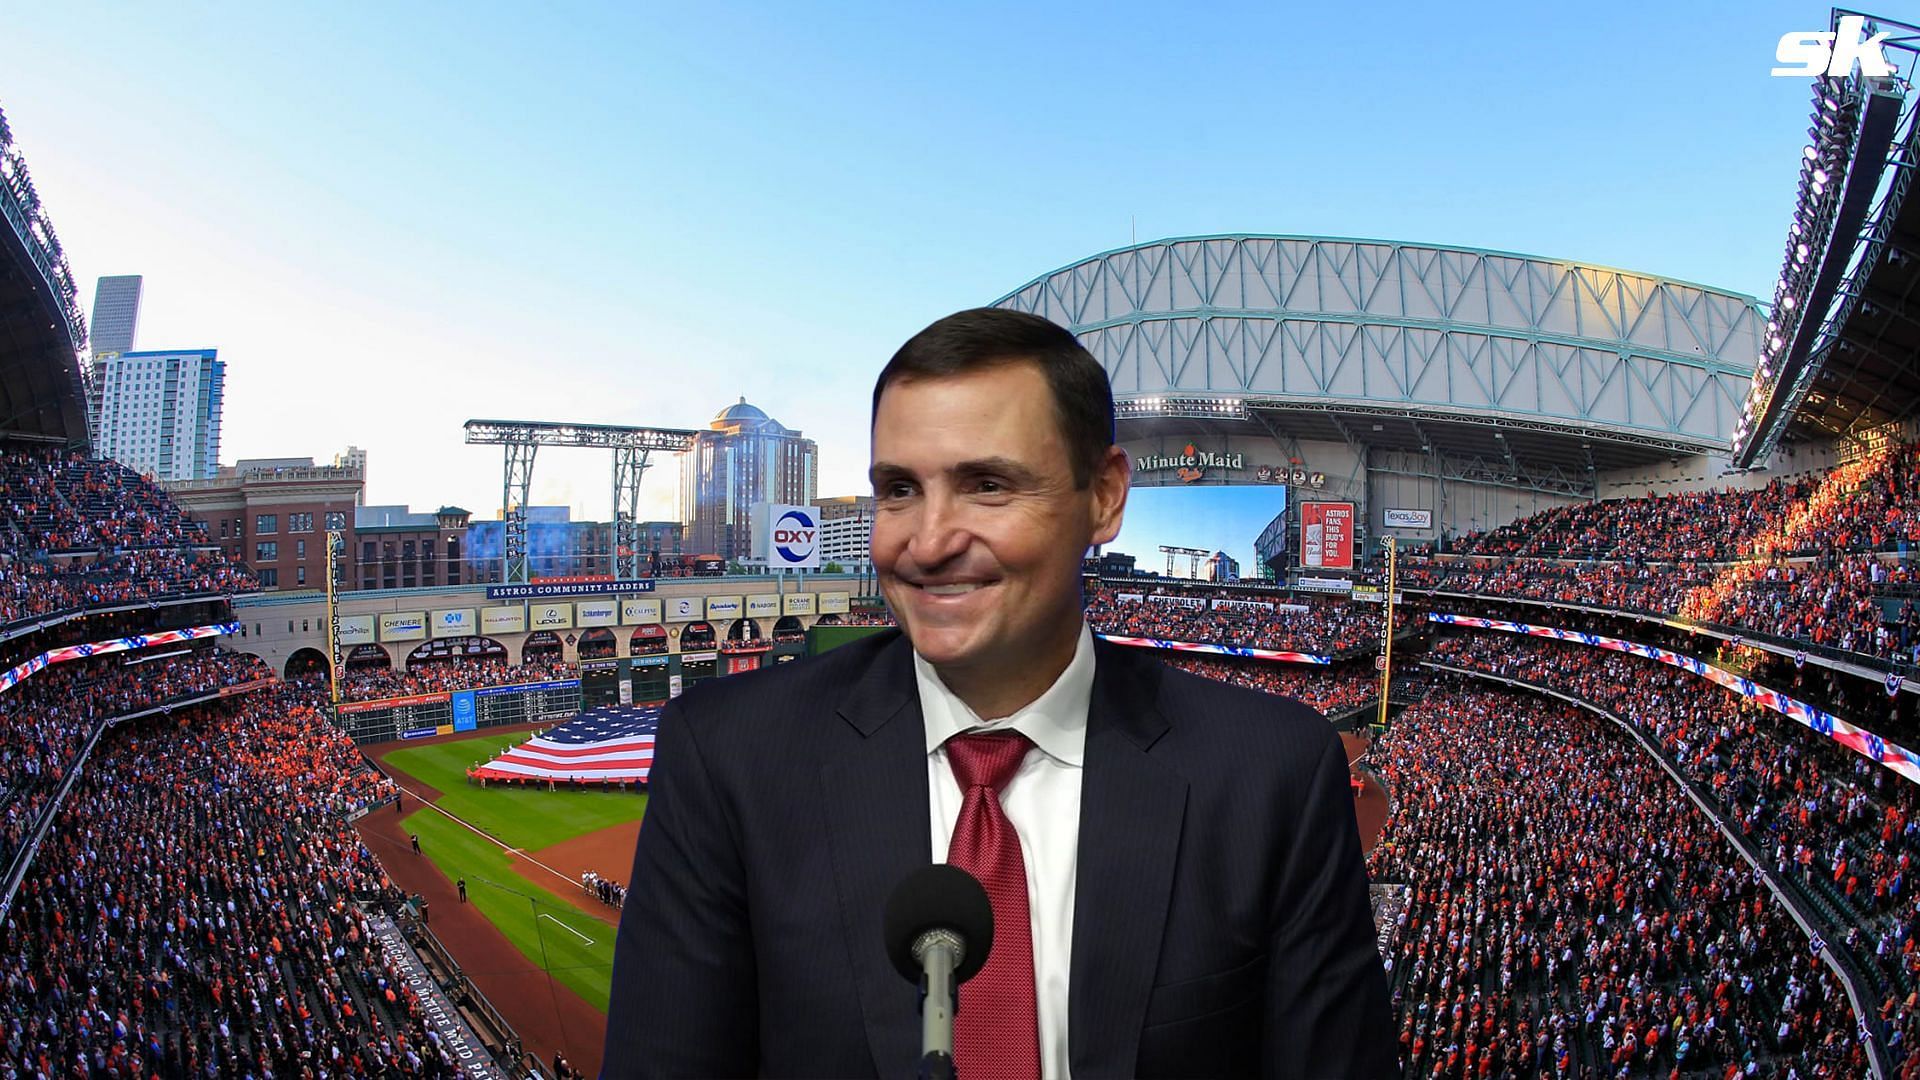 Rangers GM Chris young takes dig at Astros after ALCS Game 7 triumph. 